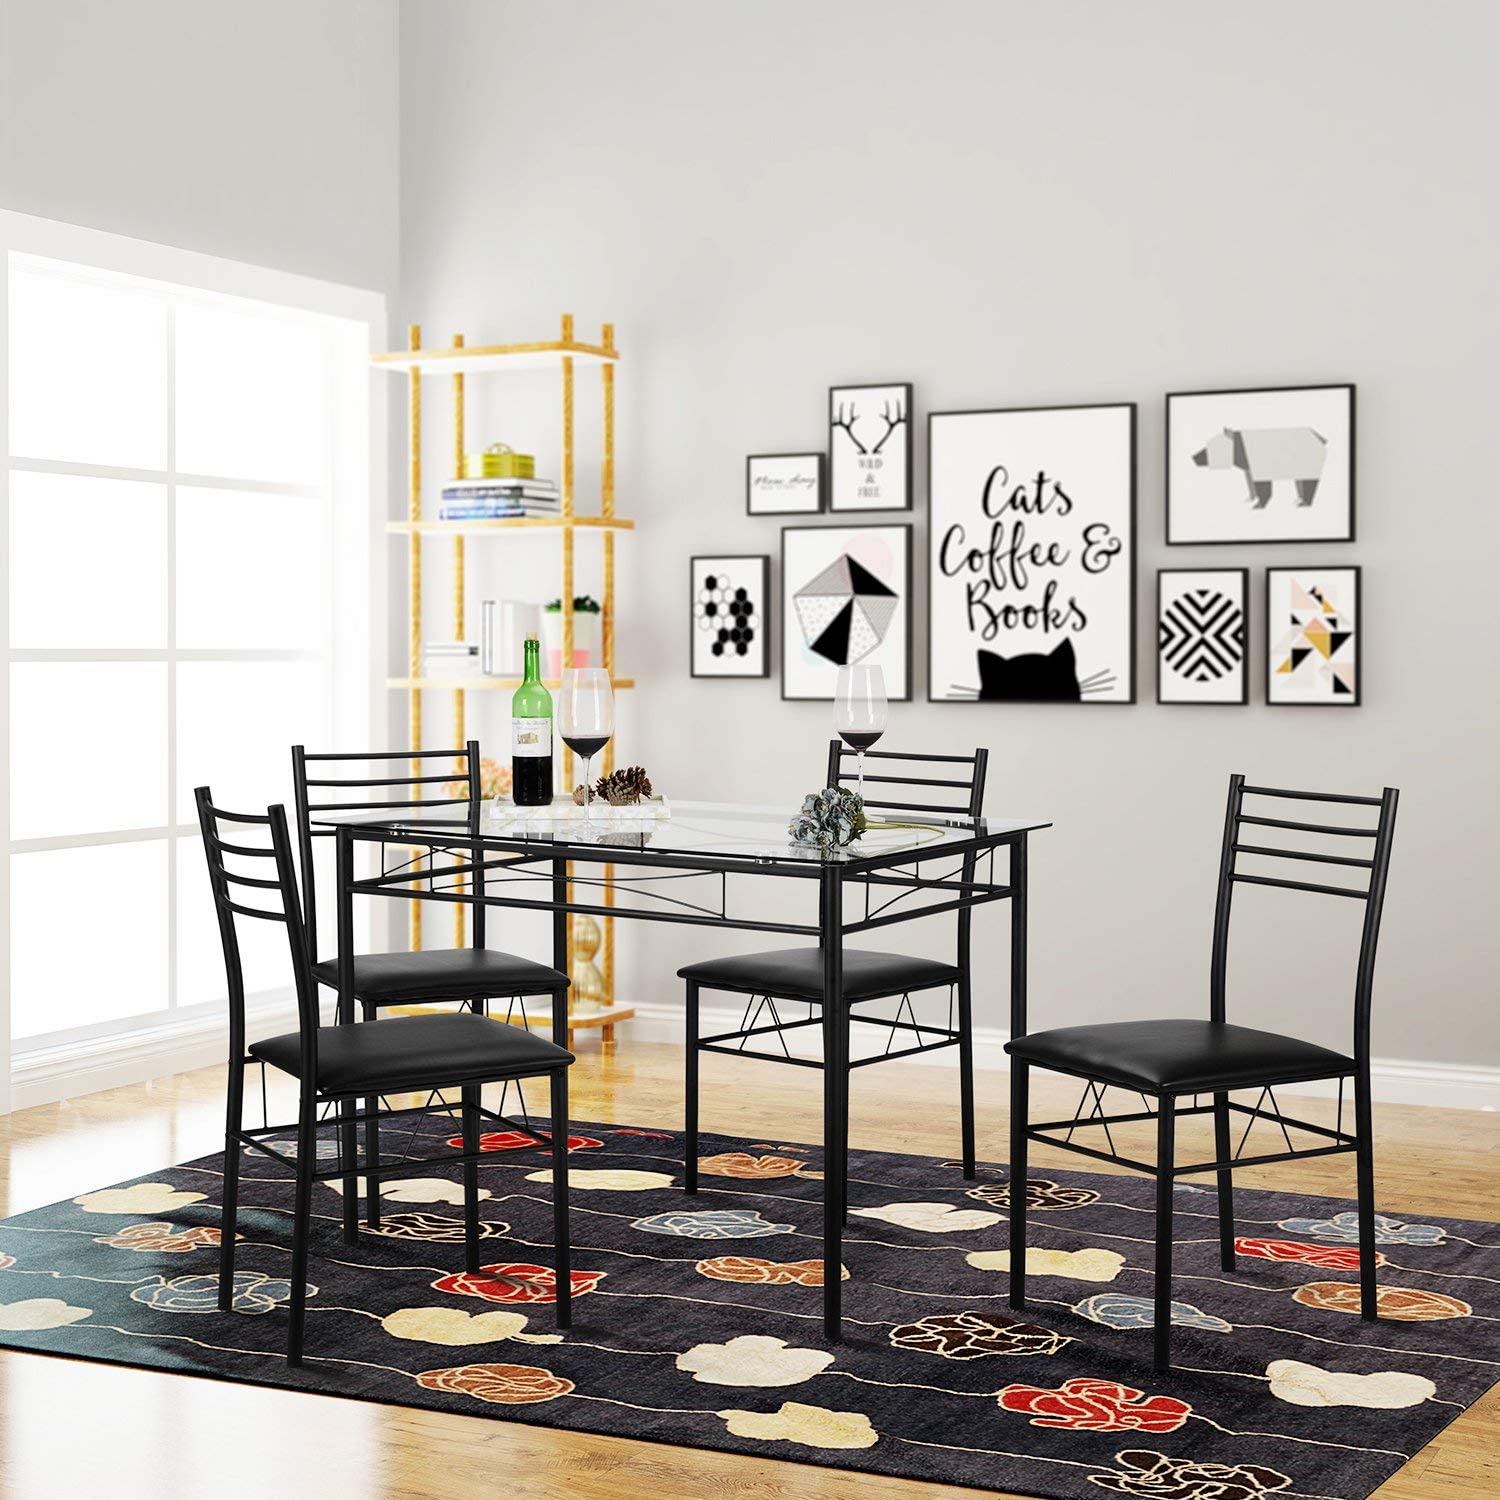 Cheap 5 Piece Dining Table With Chair Set Black Frame Cushion Pu Chair Seat Tempered Glass For Dining Room Home Furniture